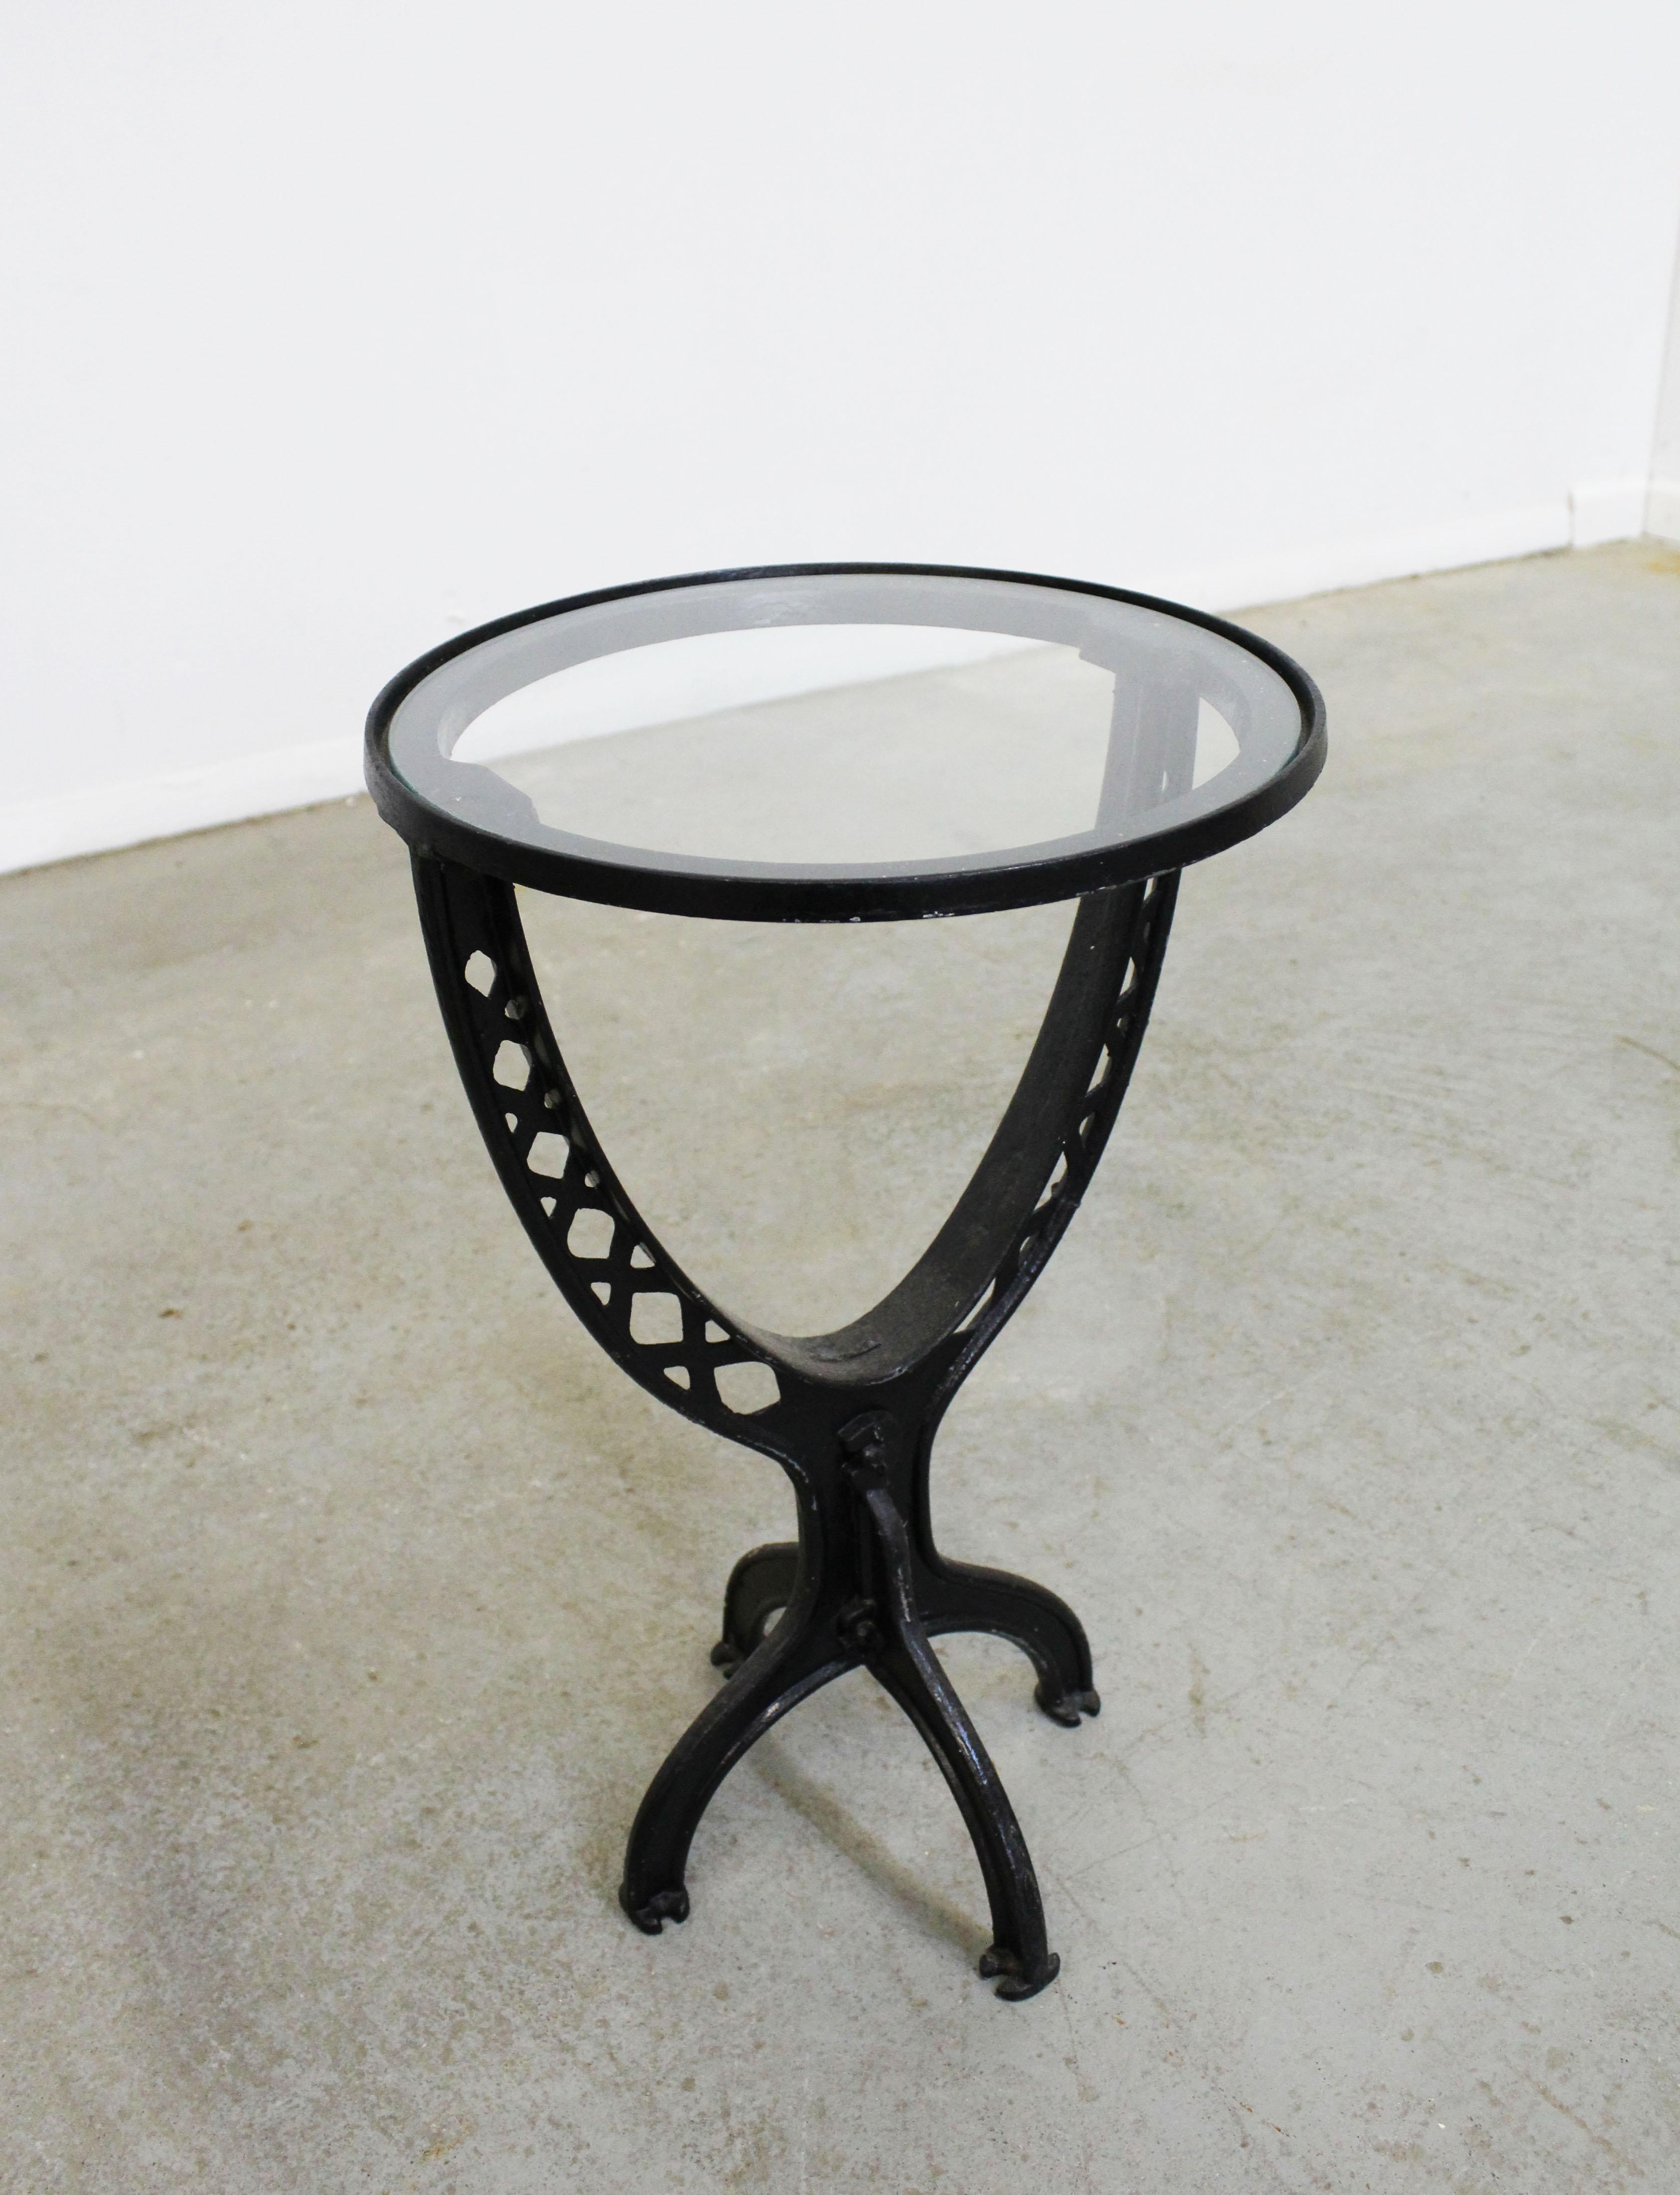 Offered is a wrought iron table made from salvaged architectural Industrial parts with added glass tops. This piece is super unique, custom made piece converted into an end table. We are unsure of the exact age. It's in good condition showing normal